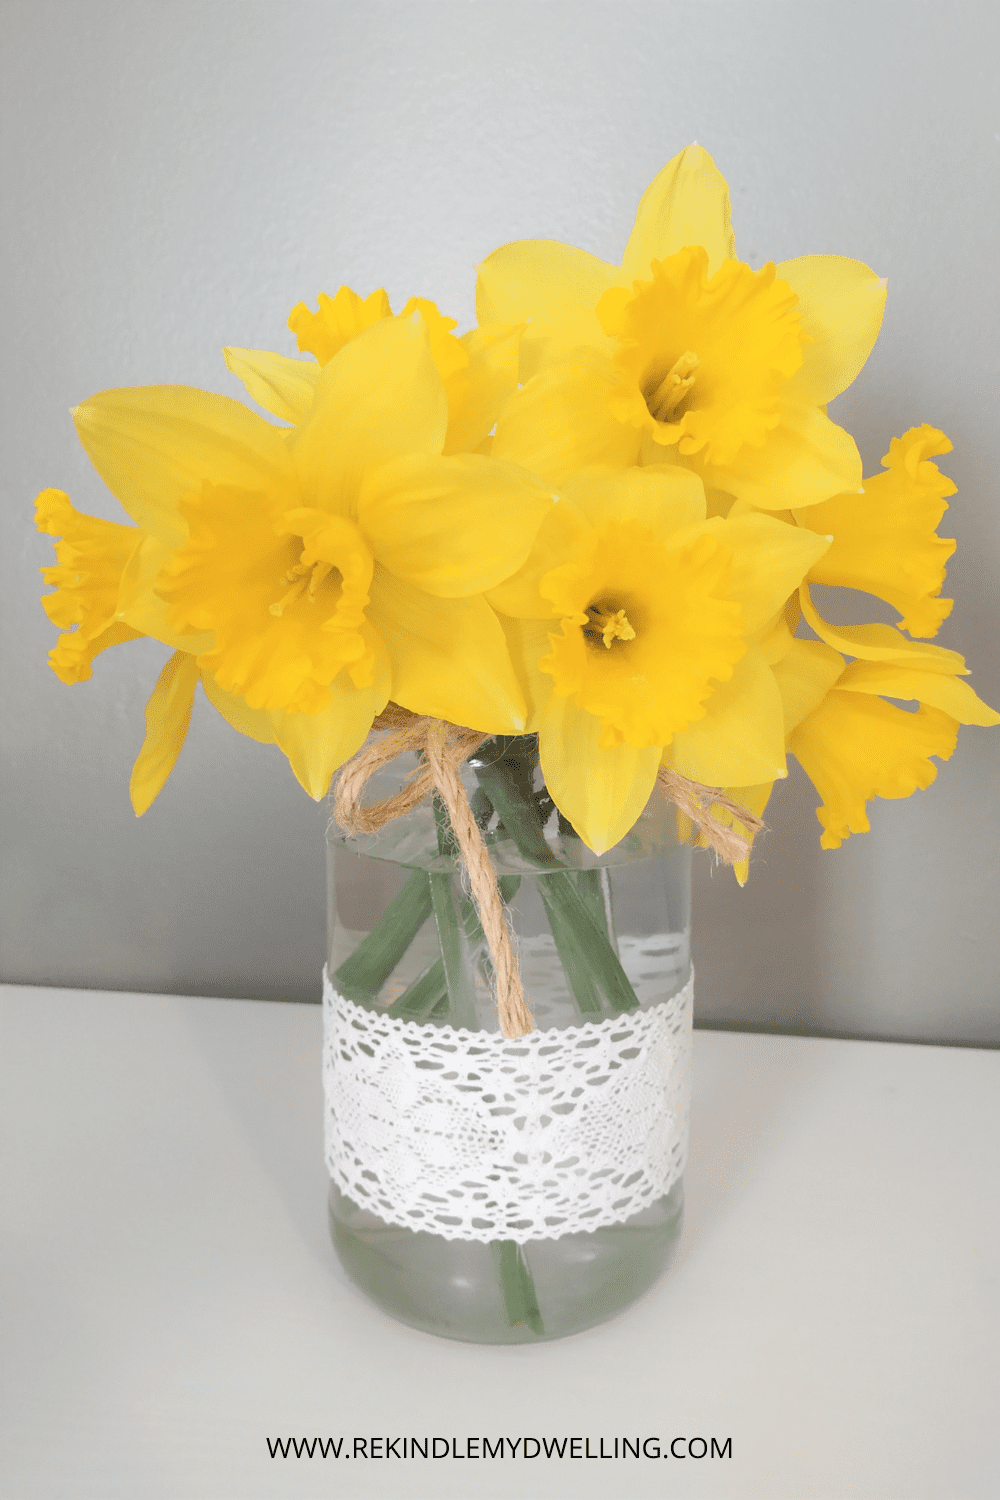 Daffodils in a spring vase with lace.